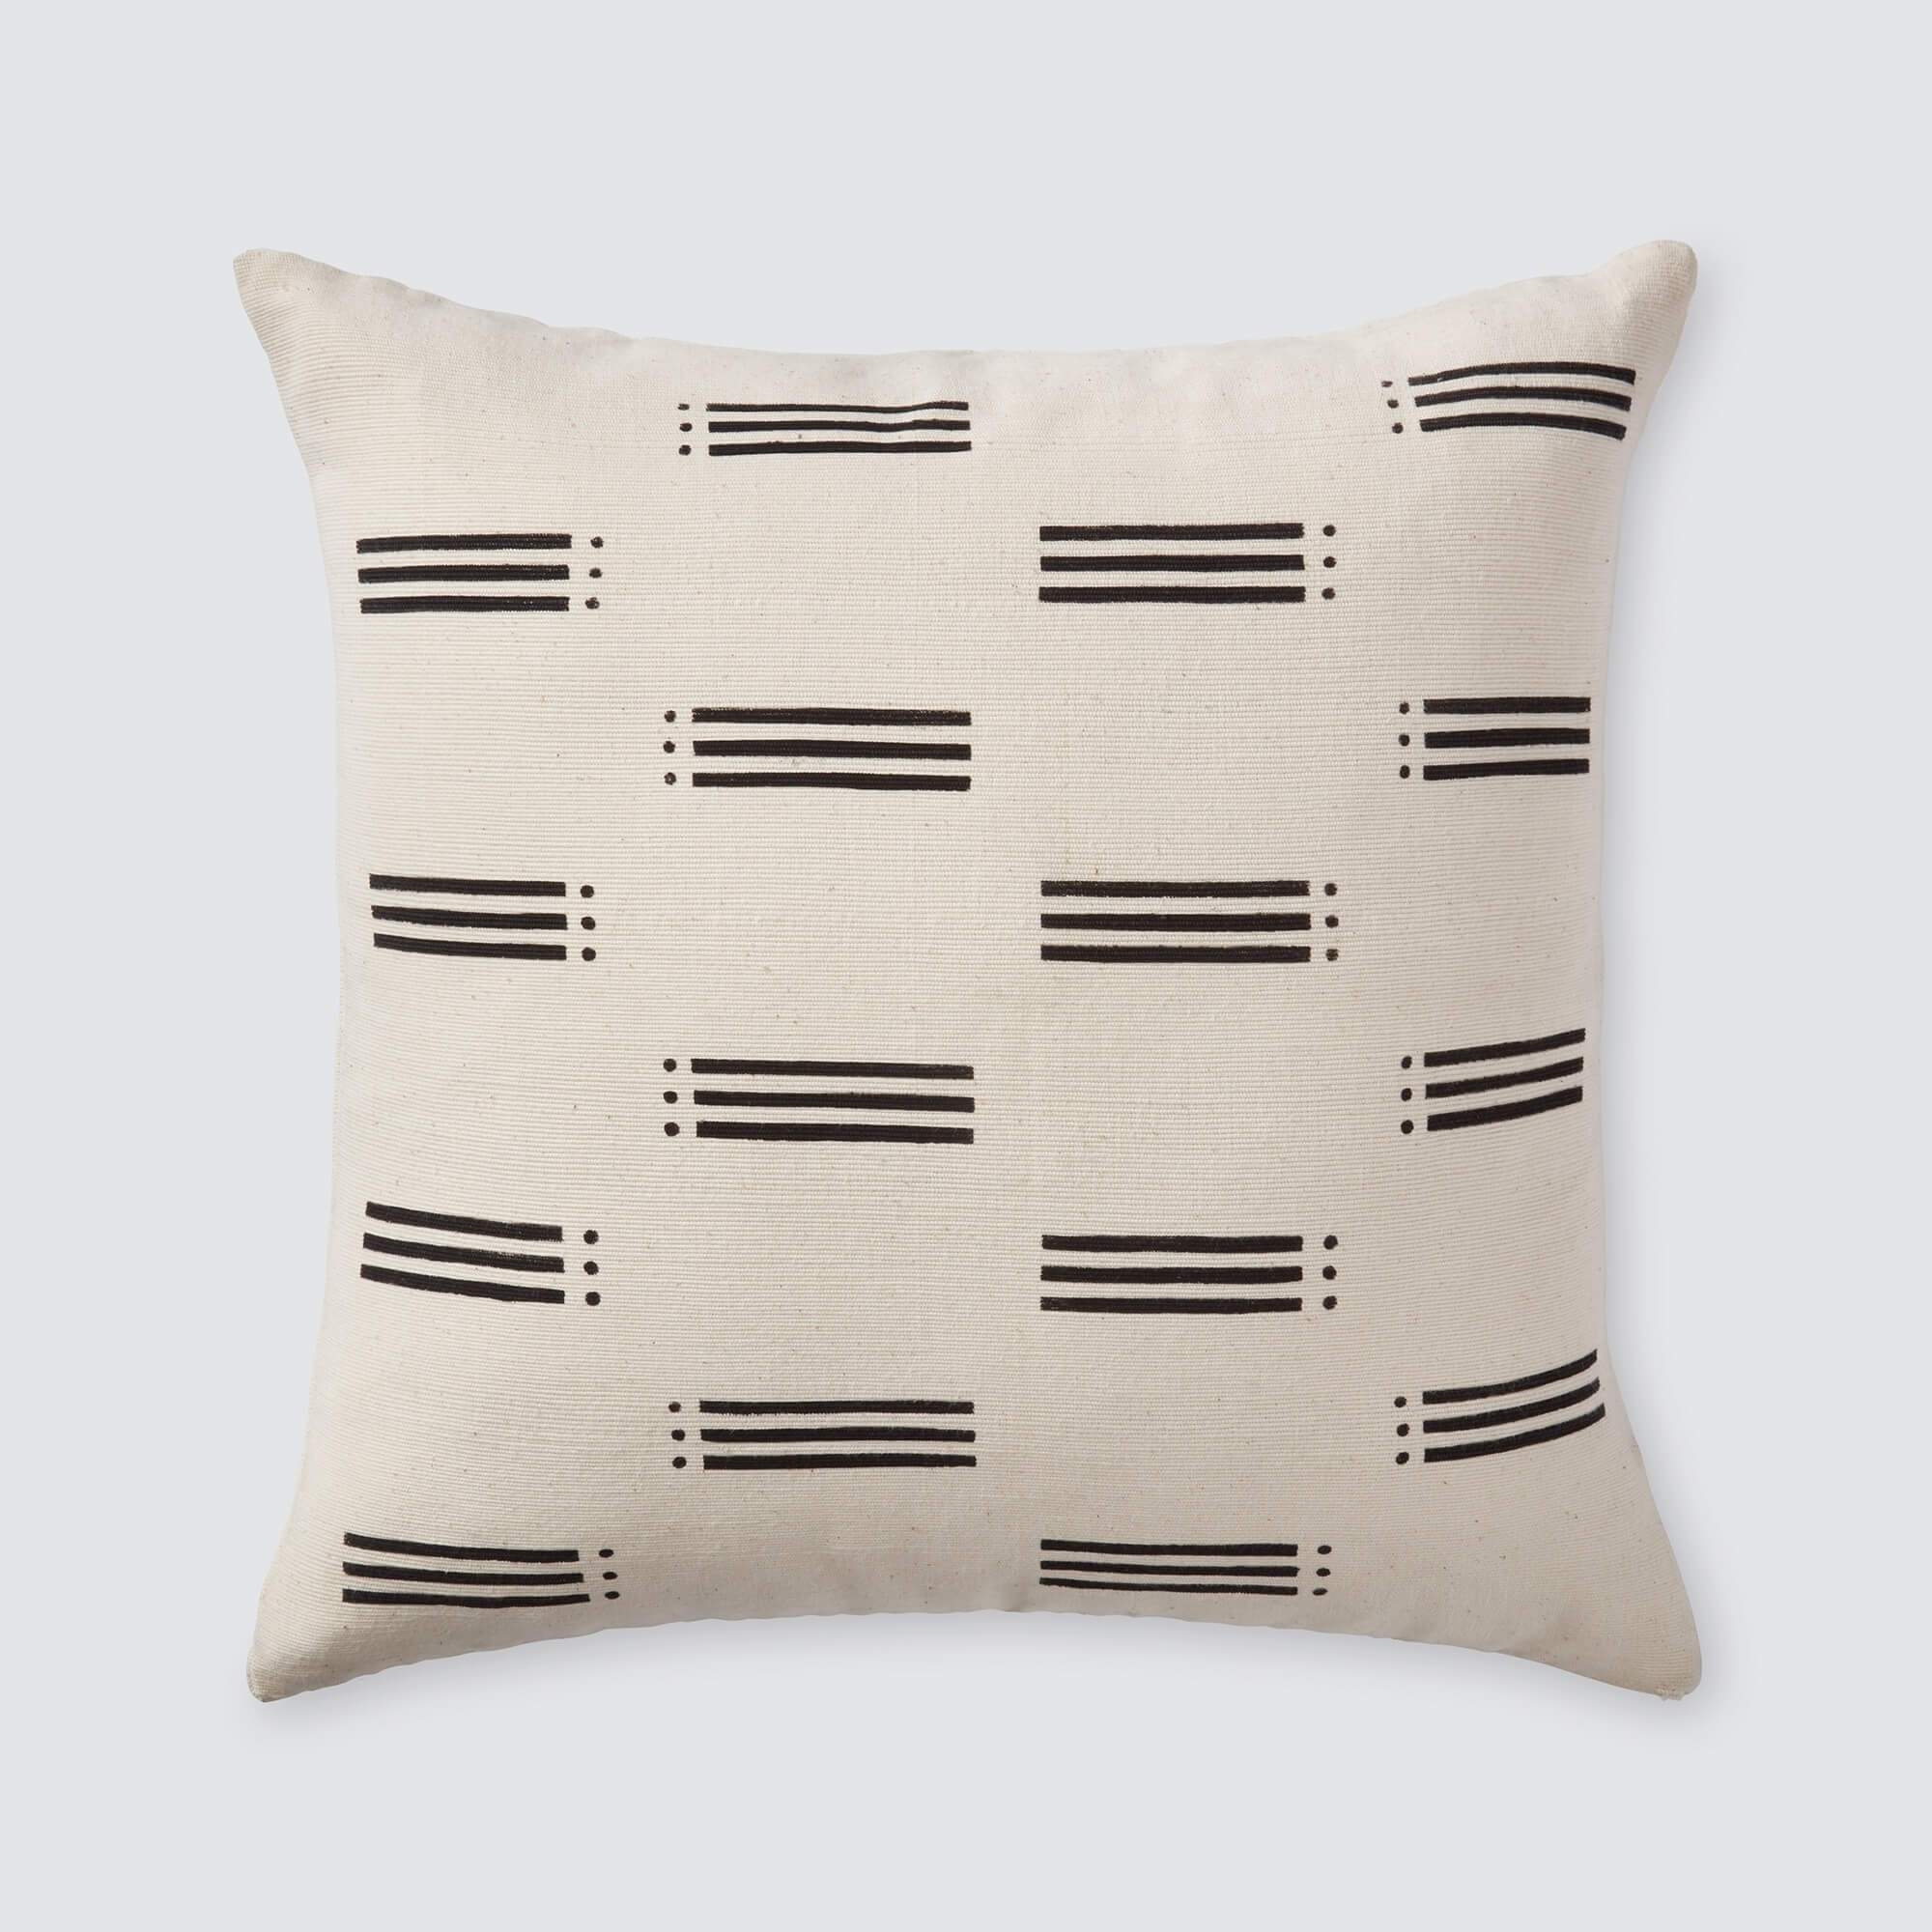 Soleil Mud Cloth Pillow By The Citizenry - Image 0